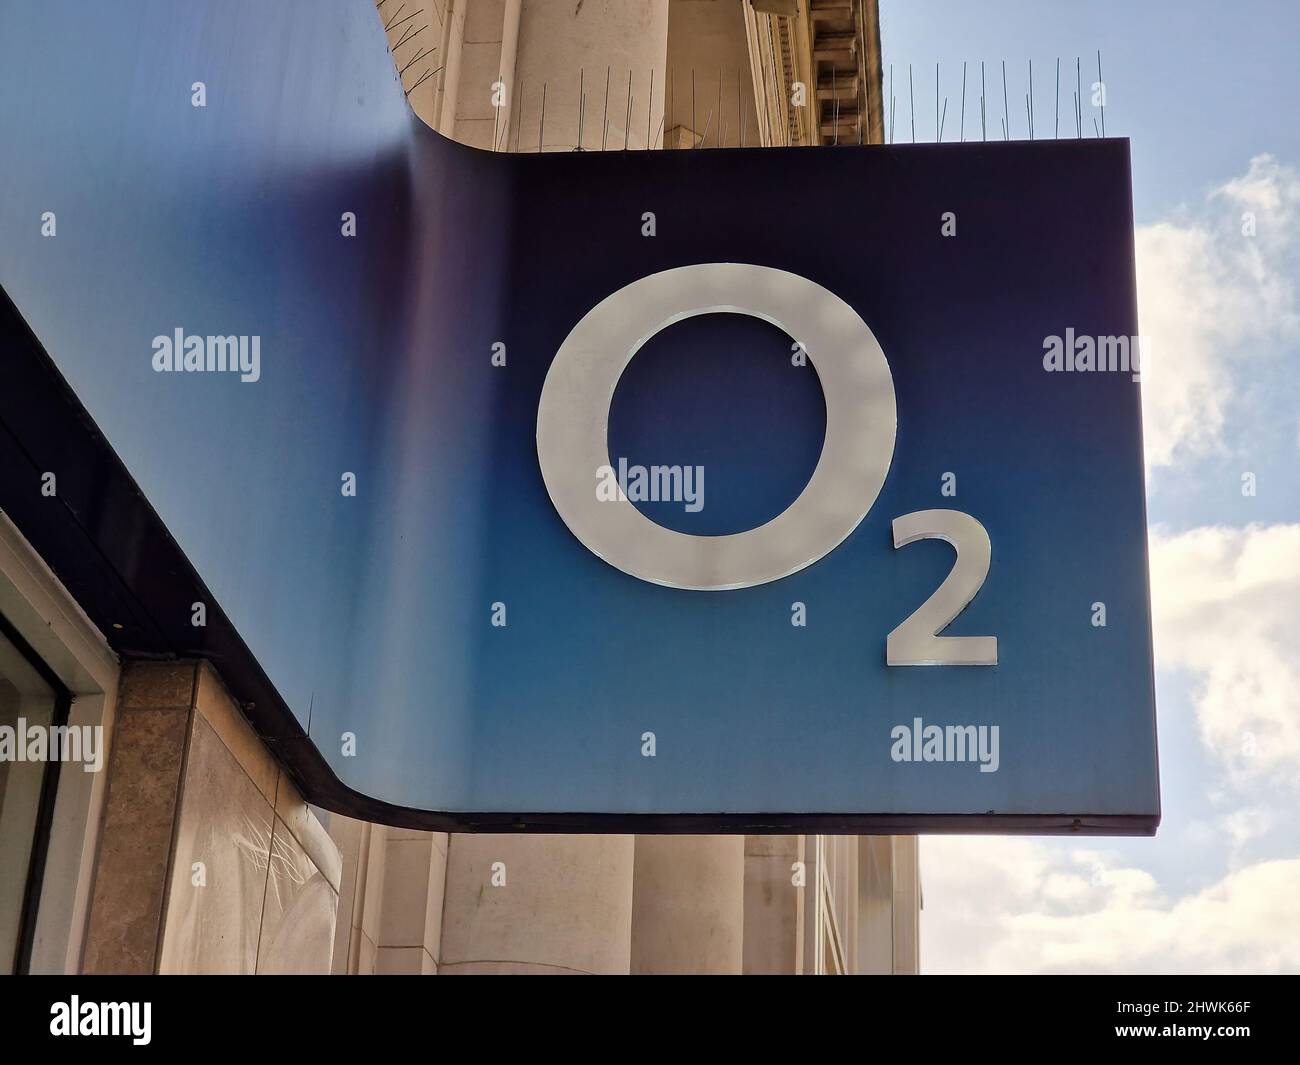 Cardiff, Wales, UK, February 25, 2022 : O2 mobile phone telecommunications service provider's logo advertising sign at its branch retail business shop Stock Photo